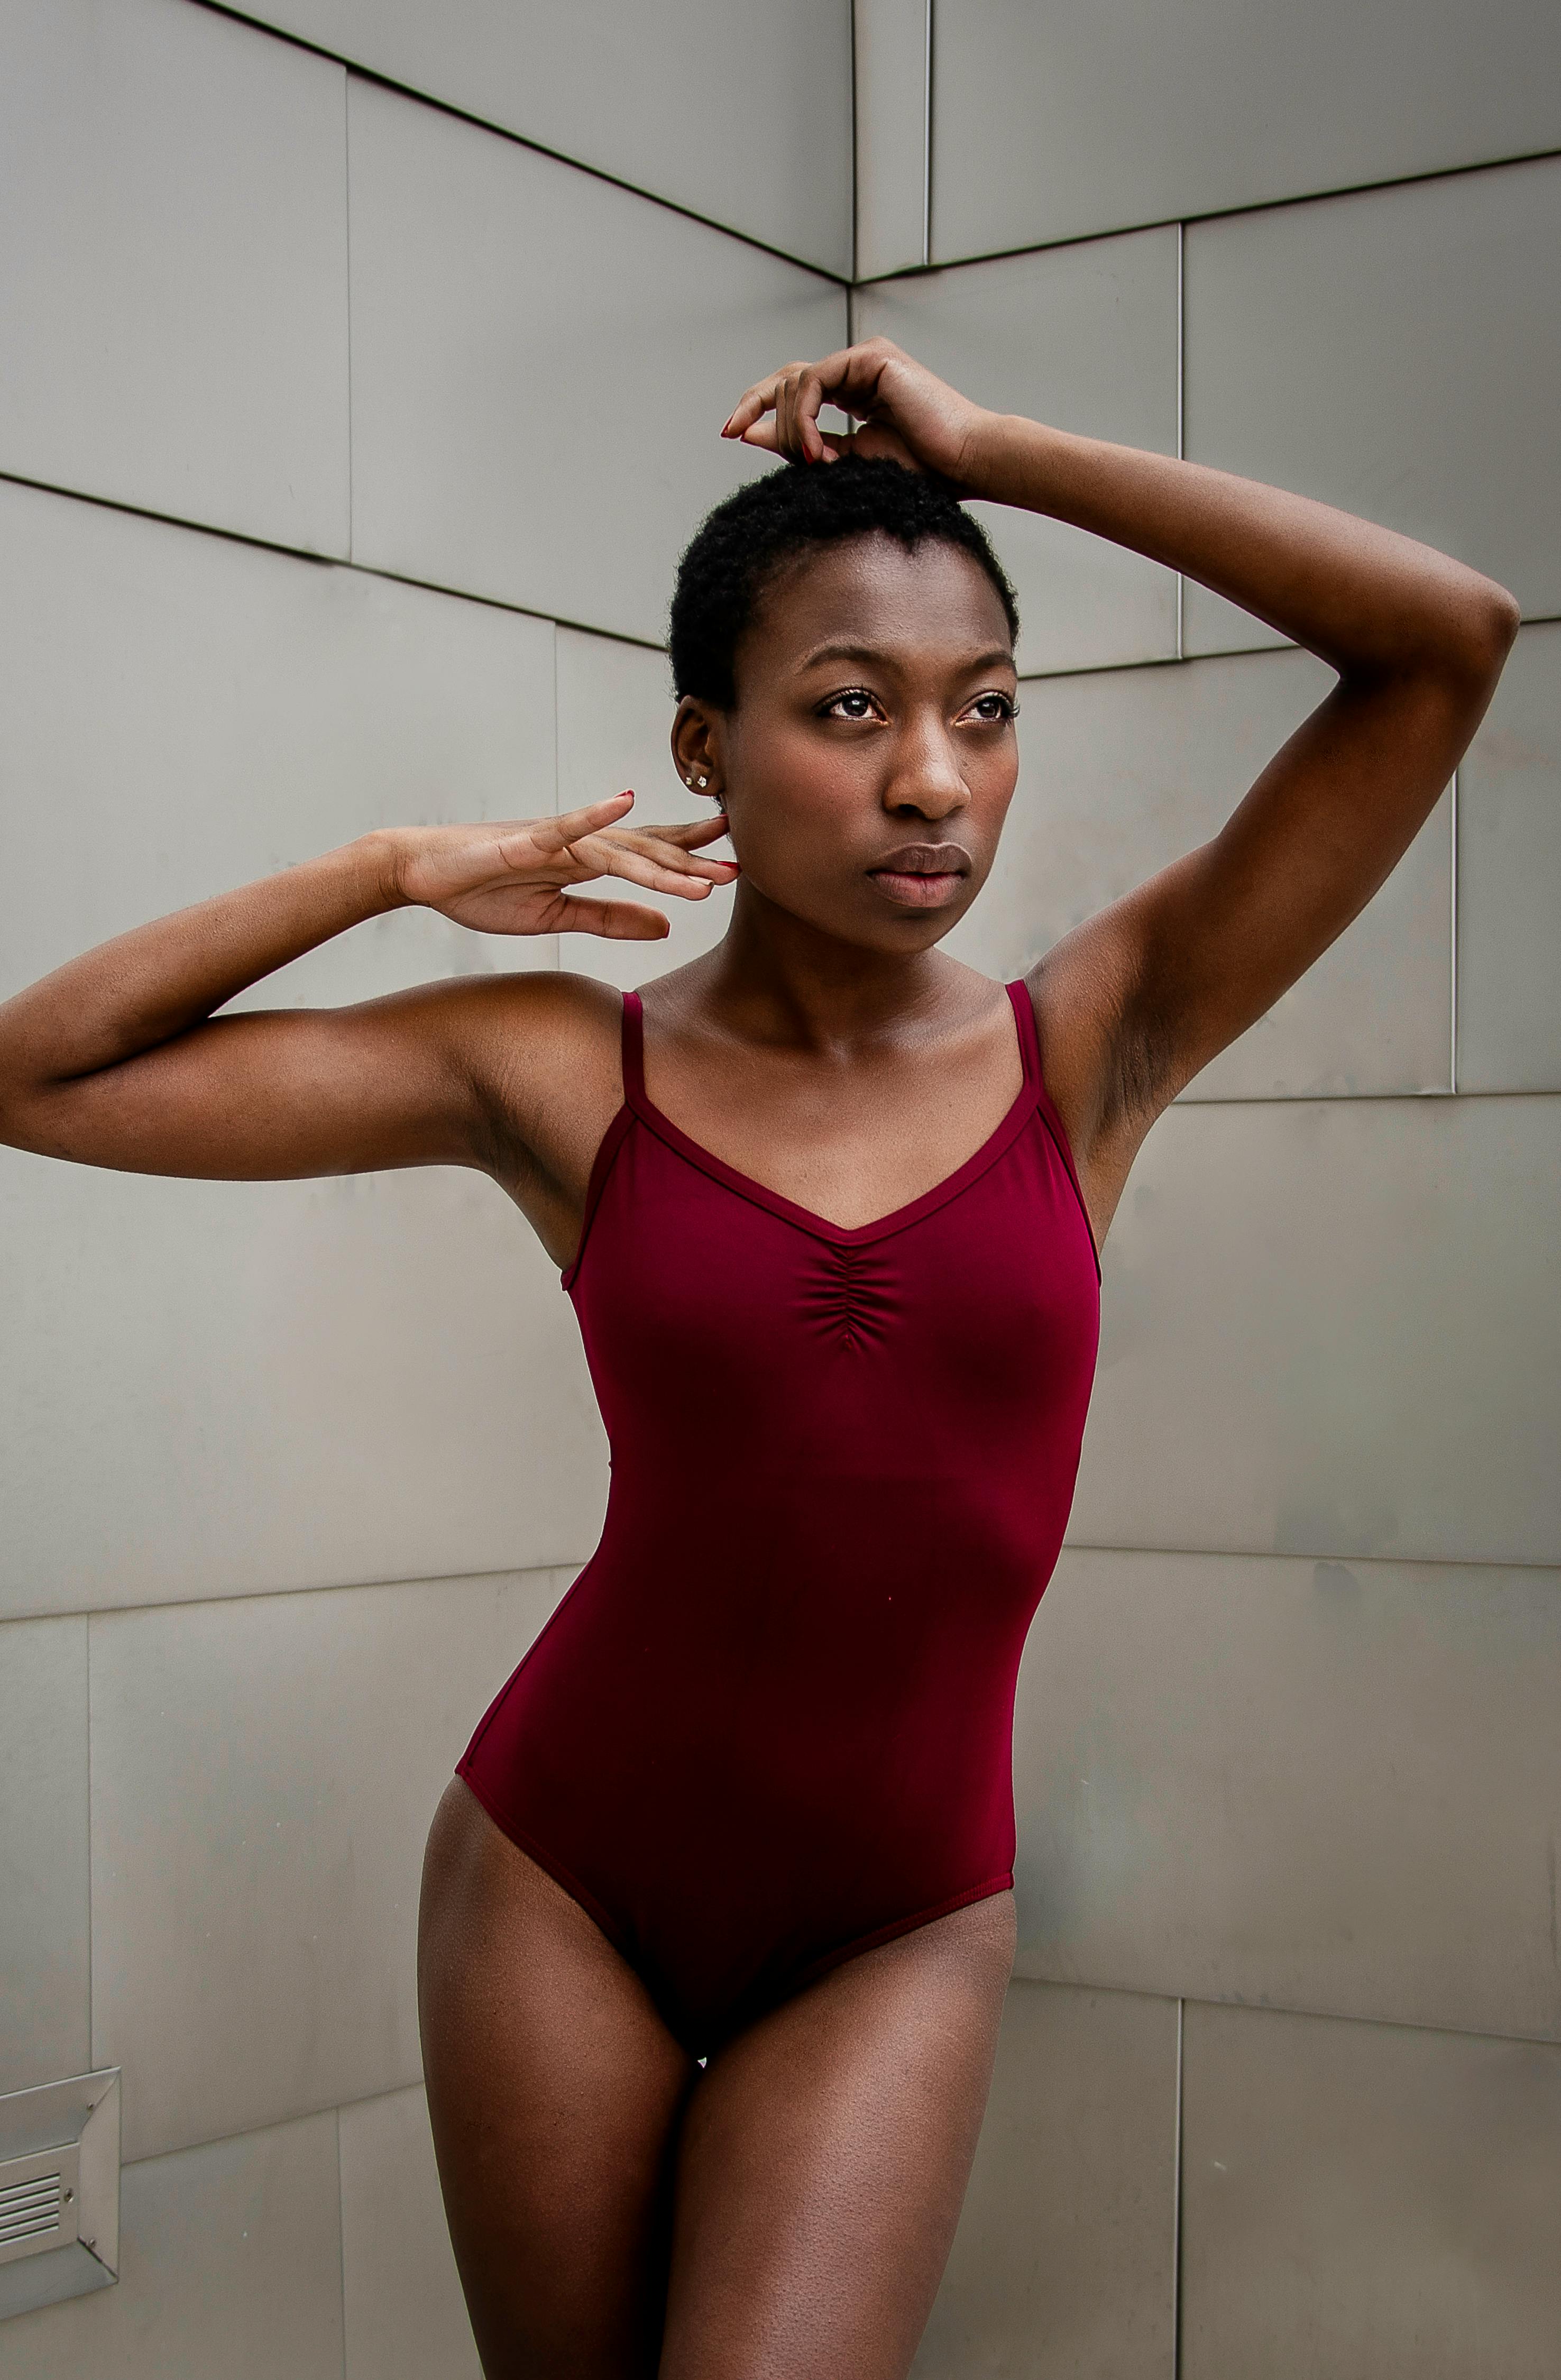 fit young black ballerina standing near tiled wall